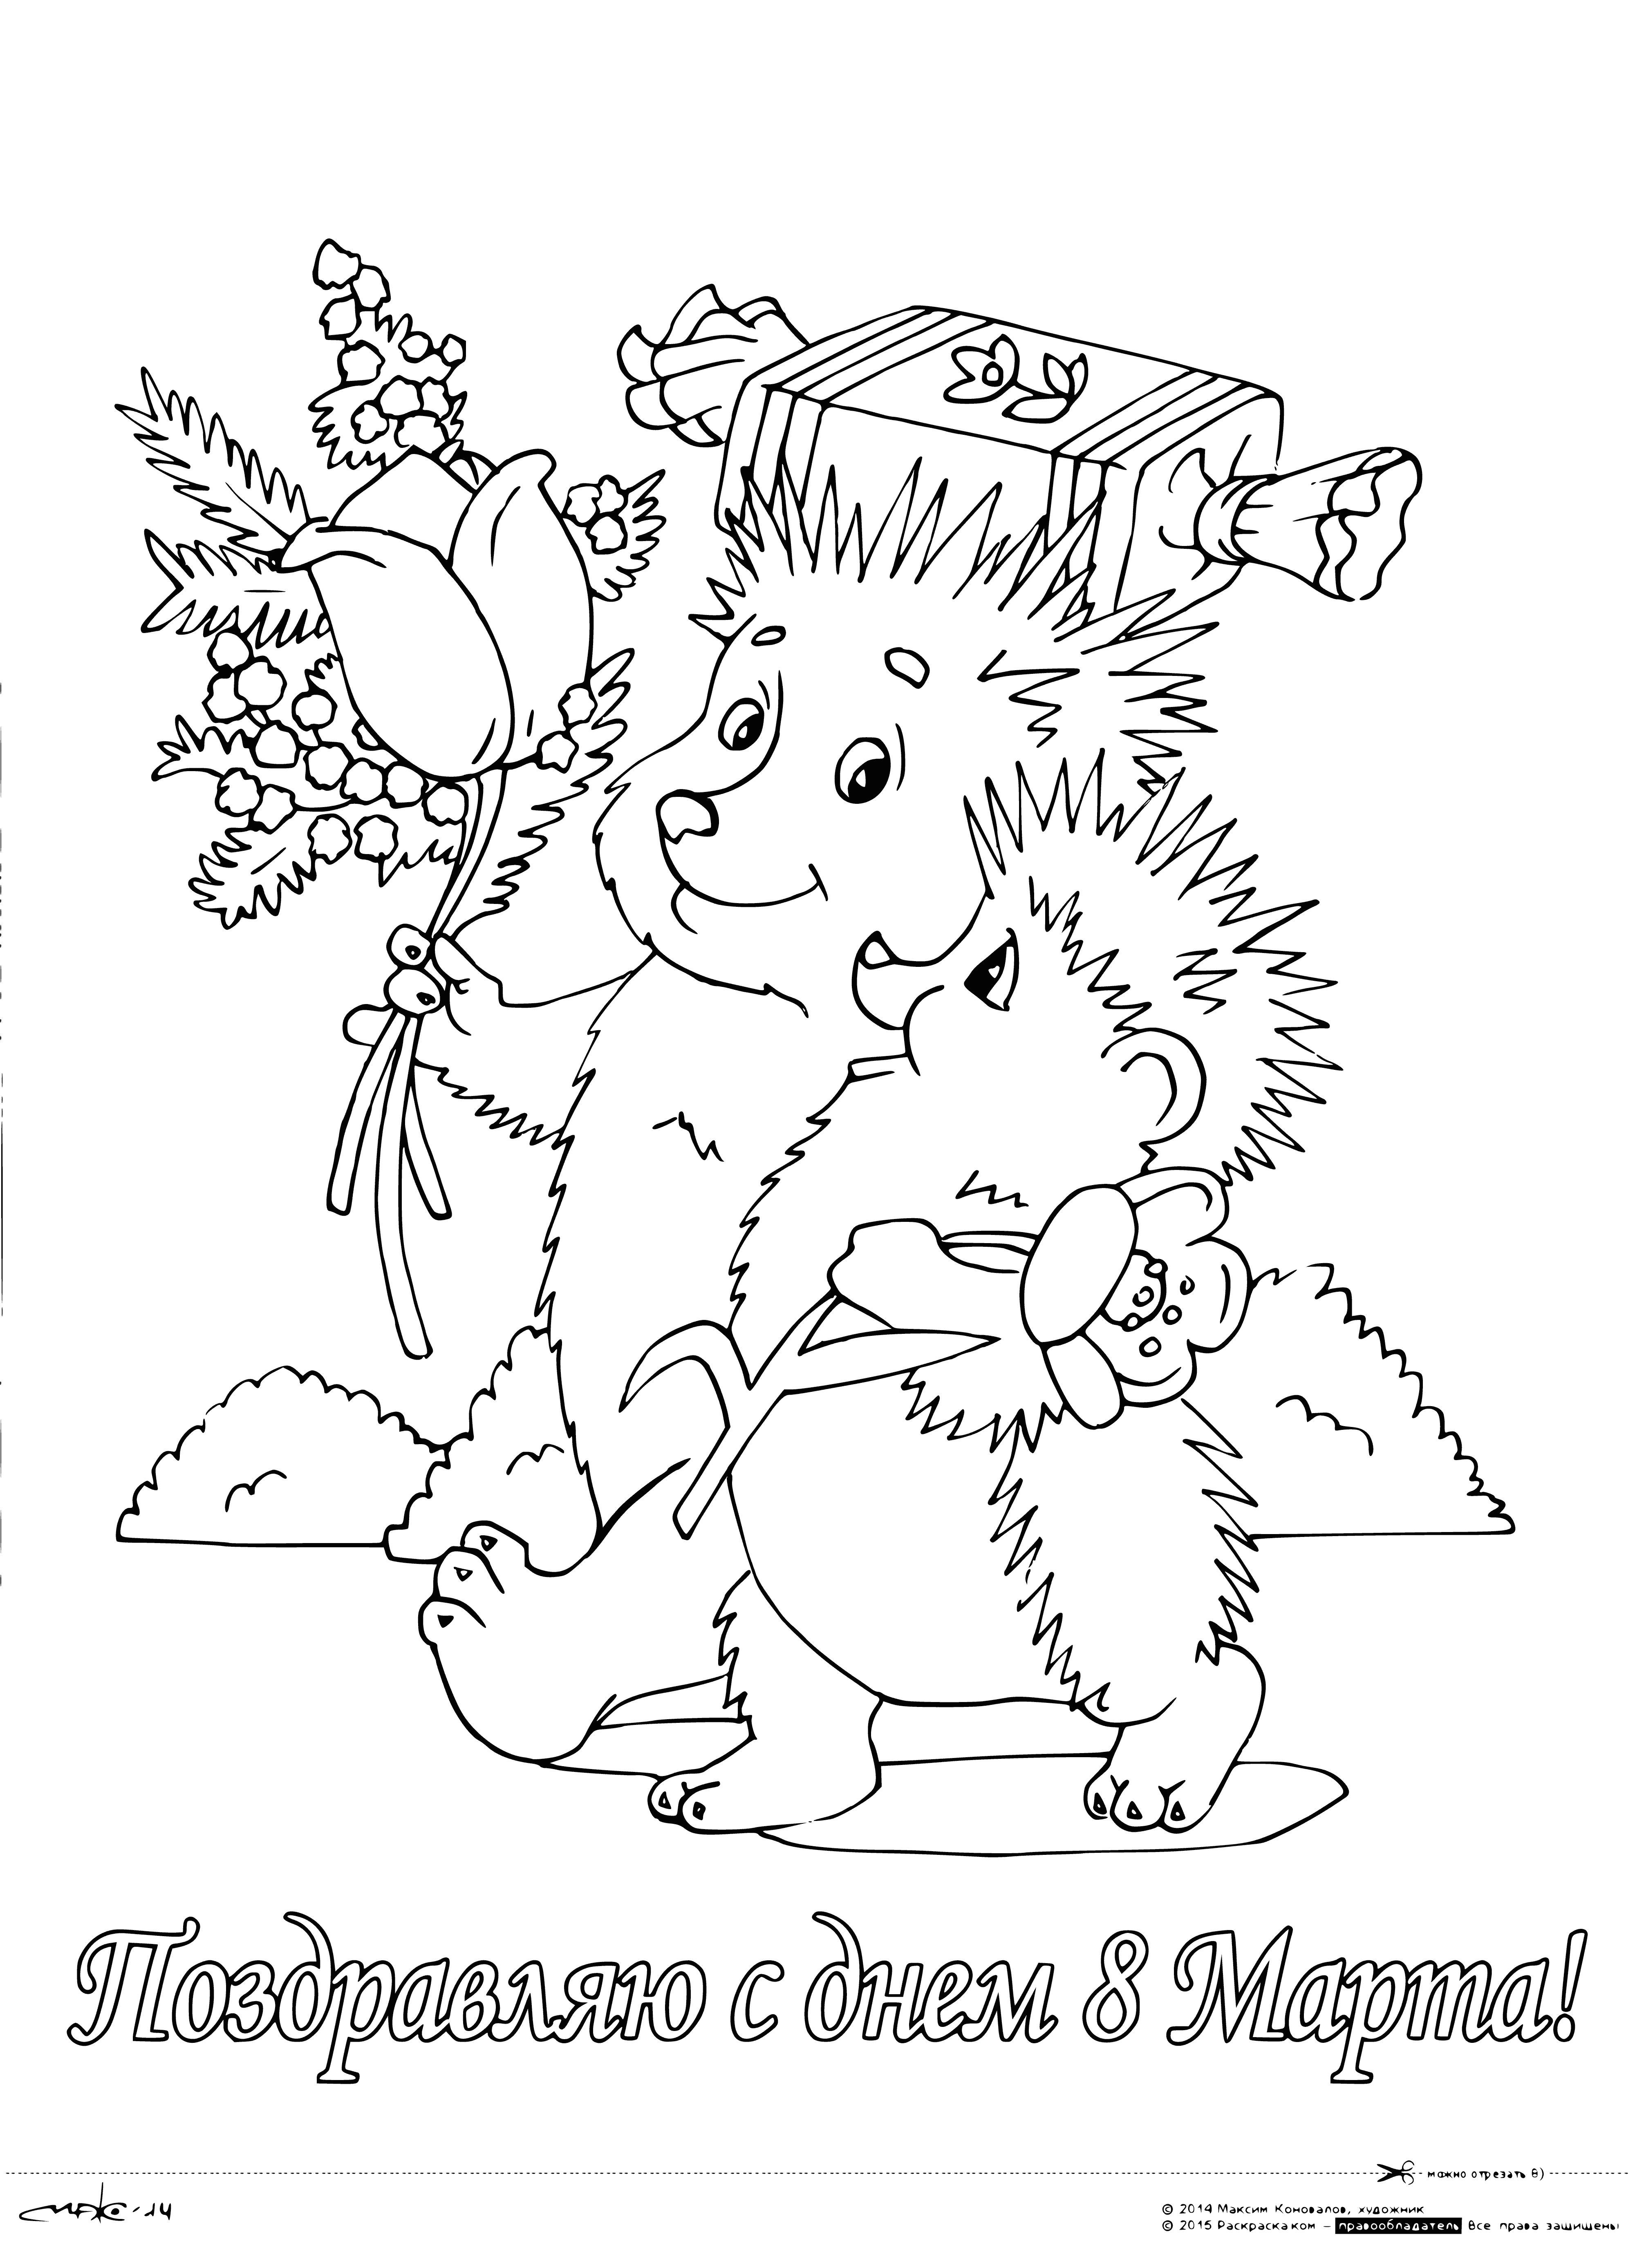 coloring page: "Congratulations" on International Women's Day (March 8), illustrated by a bouquet of flowers! #IWD2021 #BeBoldForChange